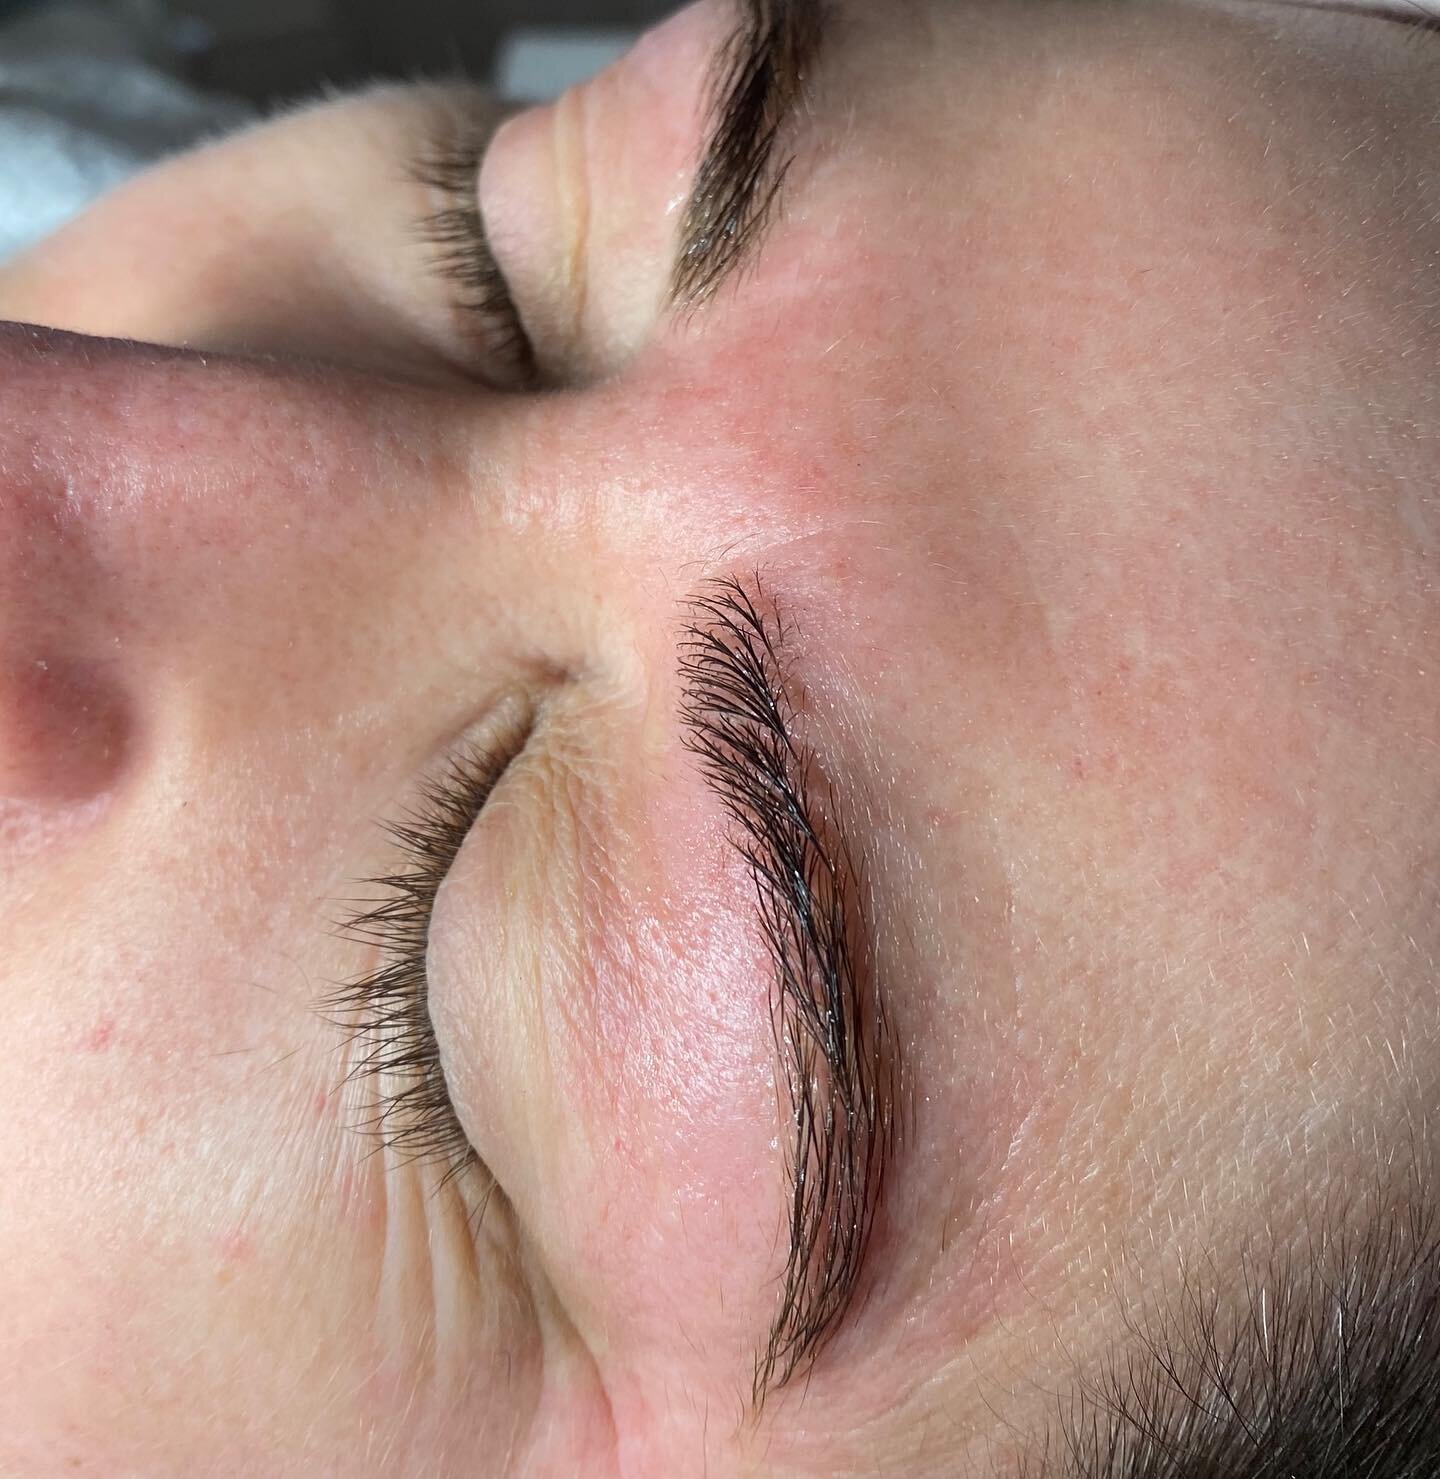 Men and women use electrolysis treatments to sharpen their brow line and permanently remove strays. No more tweezing, shaving or waxing❗️#cthairremoval #electrolysisofwallingford @electrolysisbynaz #electrolysis #waxing #tweezing #threading #plucking